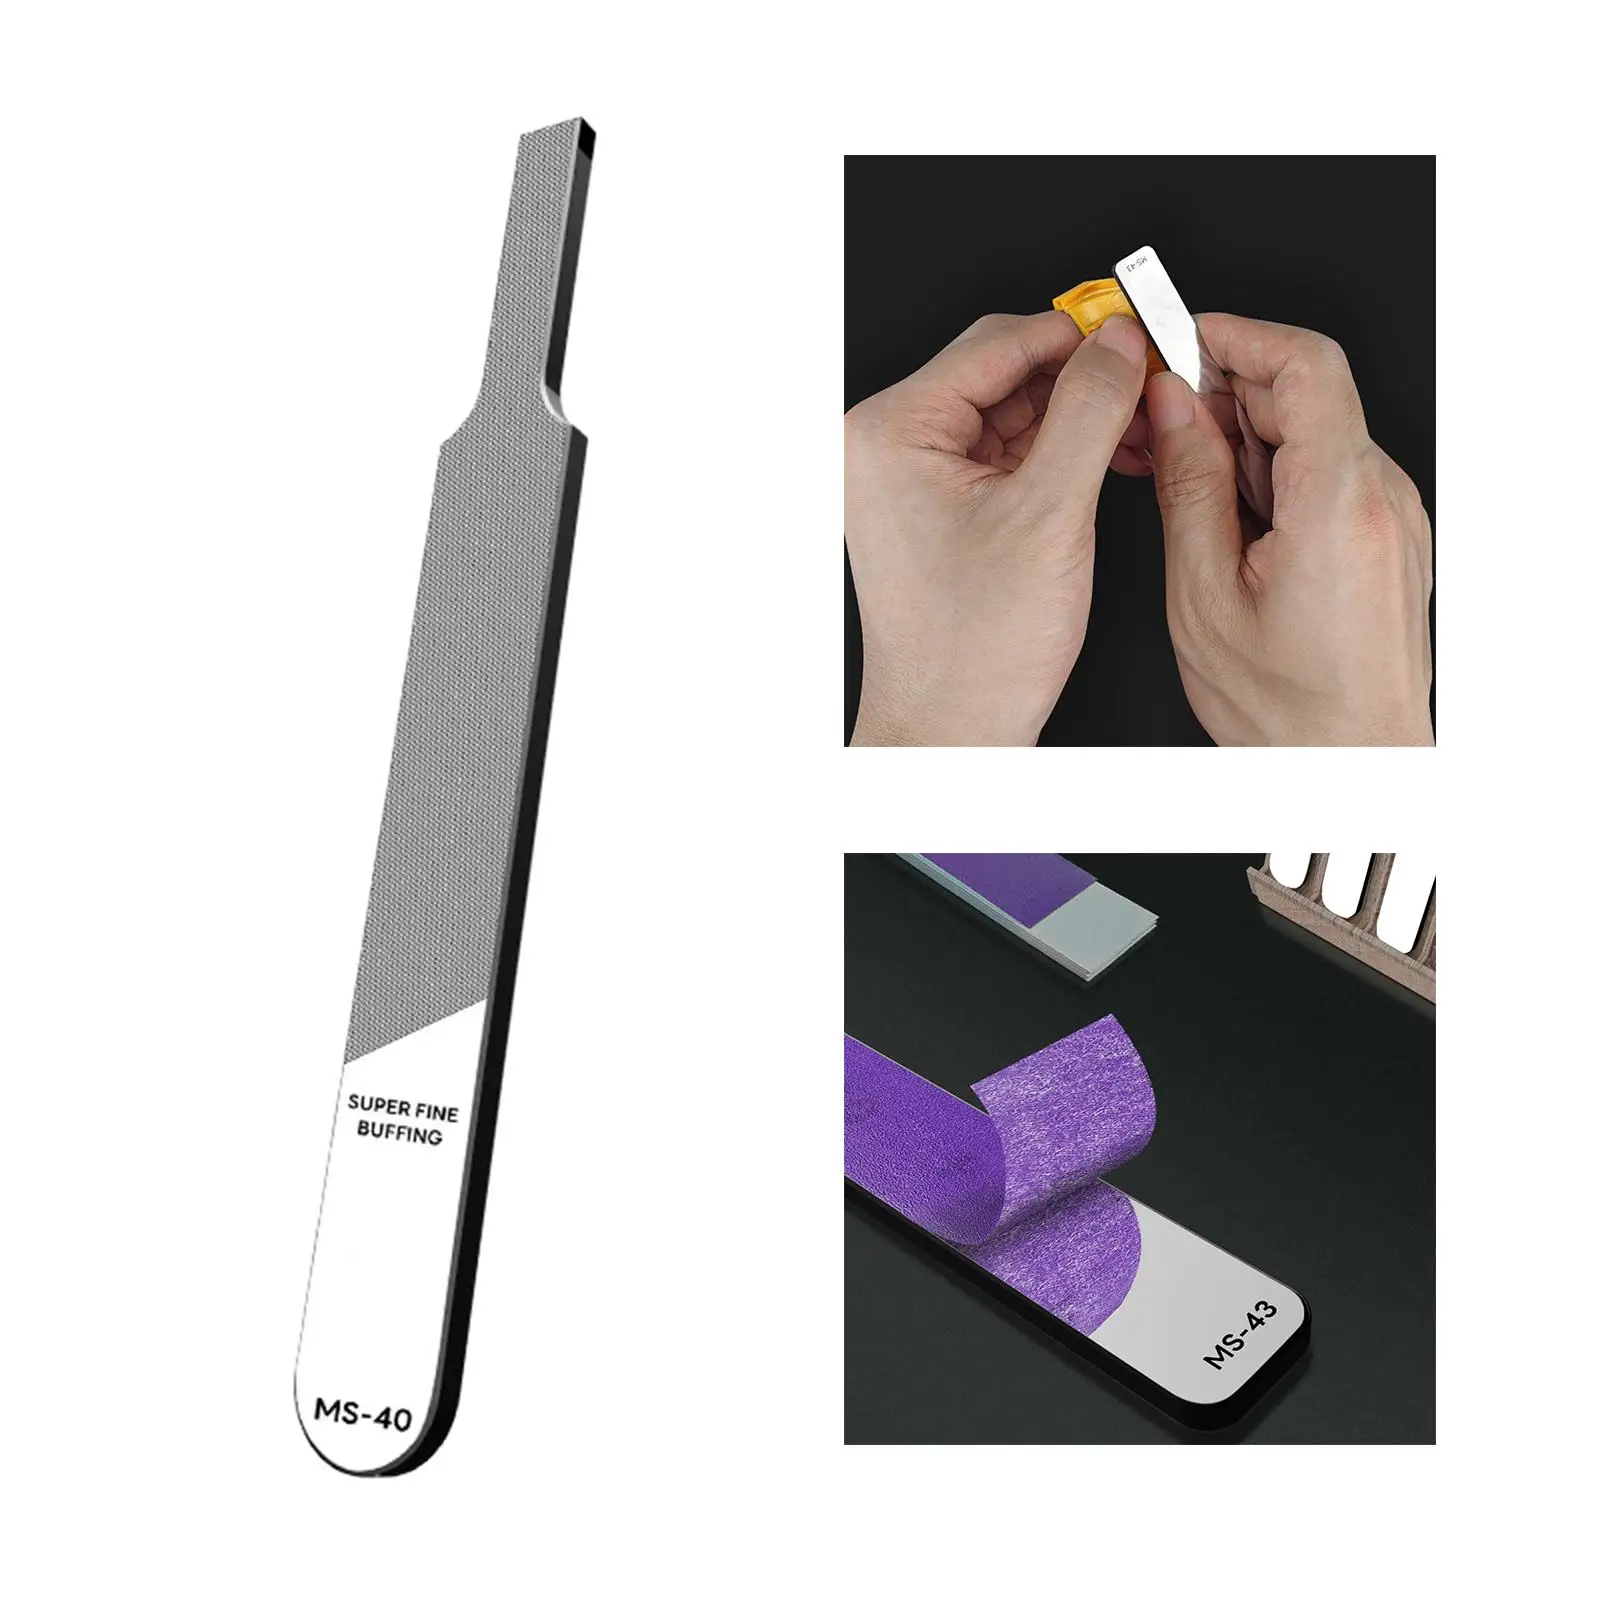 Glass File for Models Precision Rustproof Engraving File Grinding Tool for Figure Plane Car Toy Resin Material Art Work Model